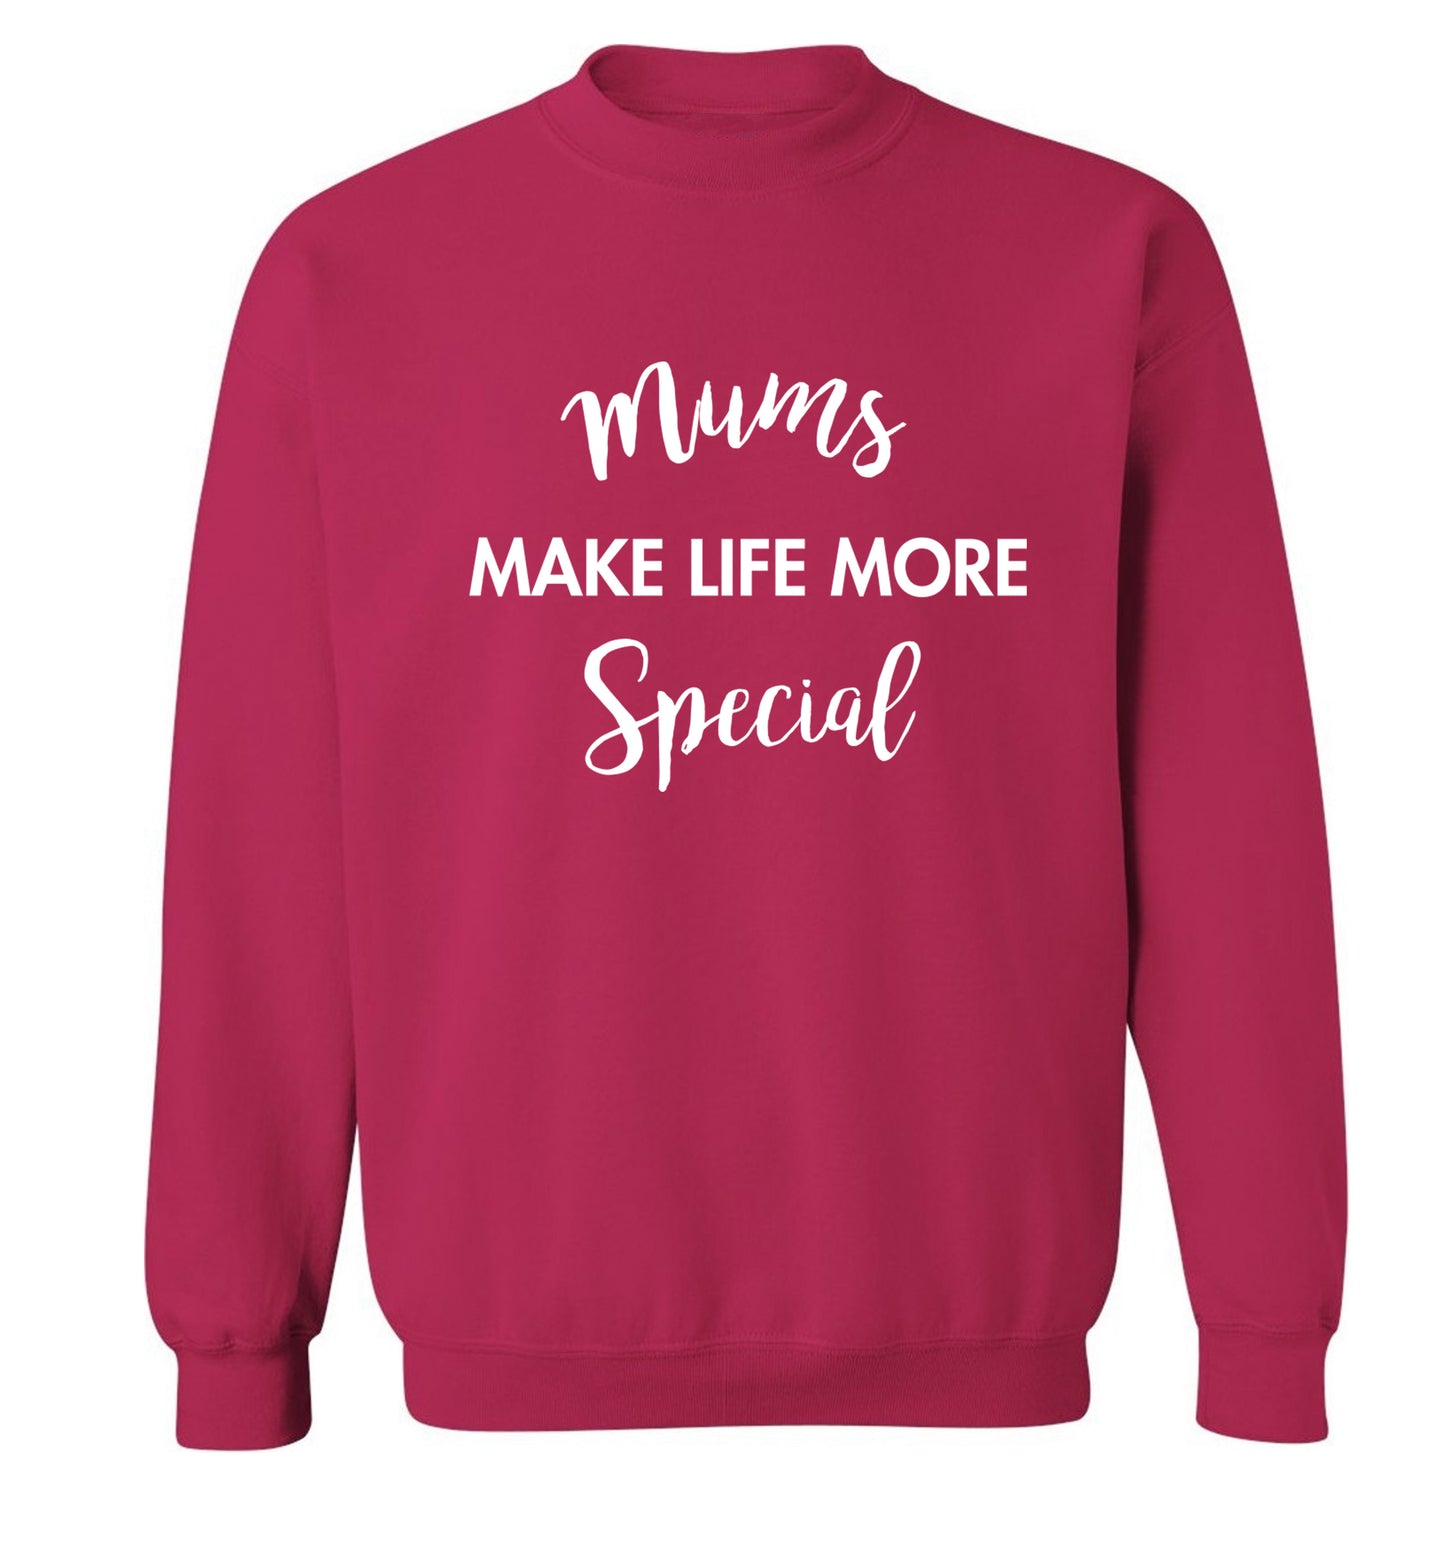 Mum's make life more special adult's unisex pink sweater 2XL